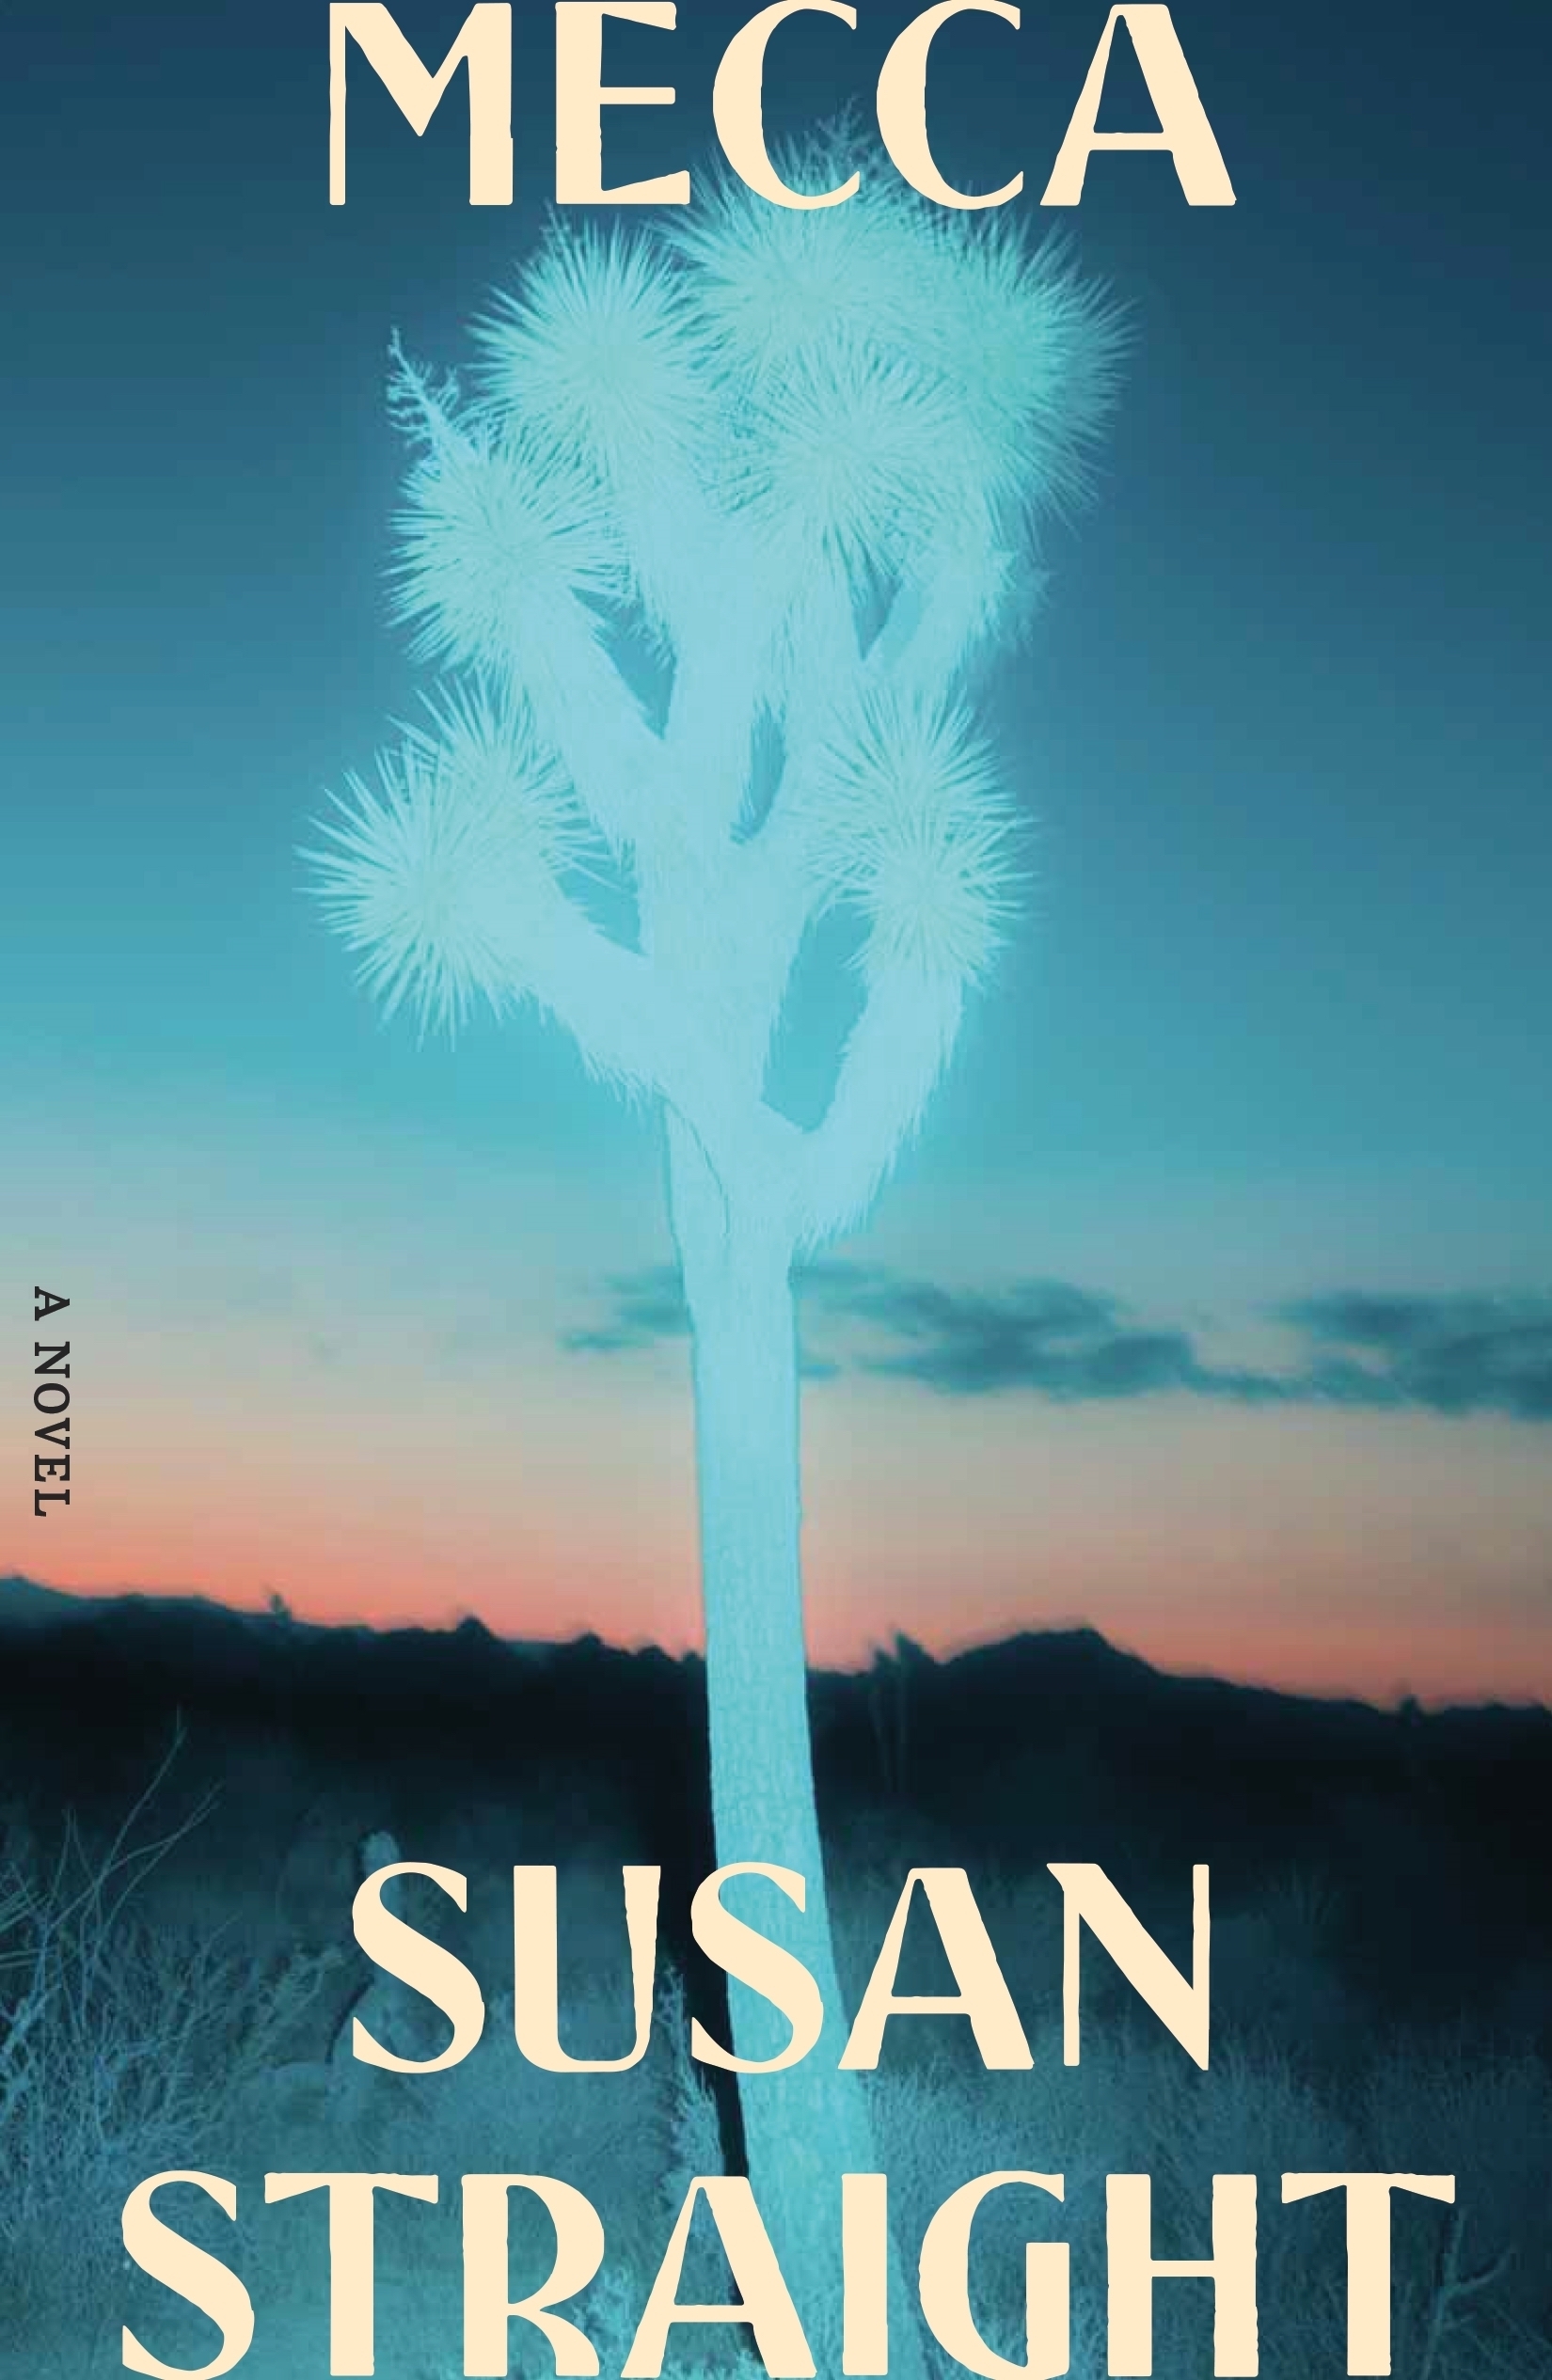 A book cover that says" 'Mecca" by Susan Straight